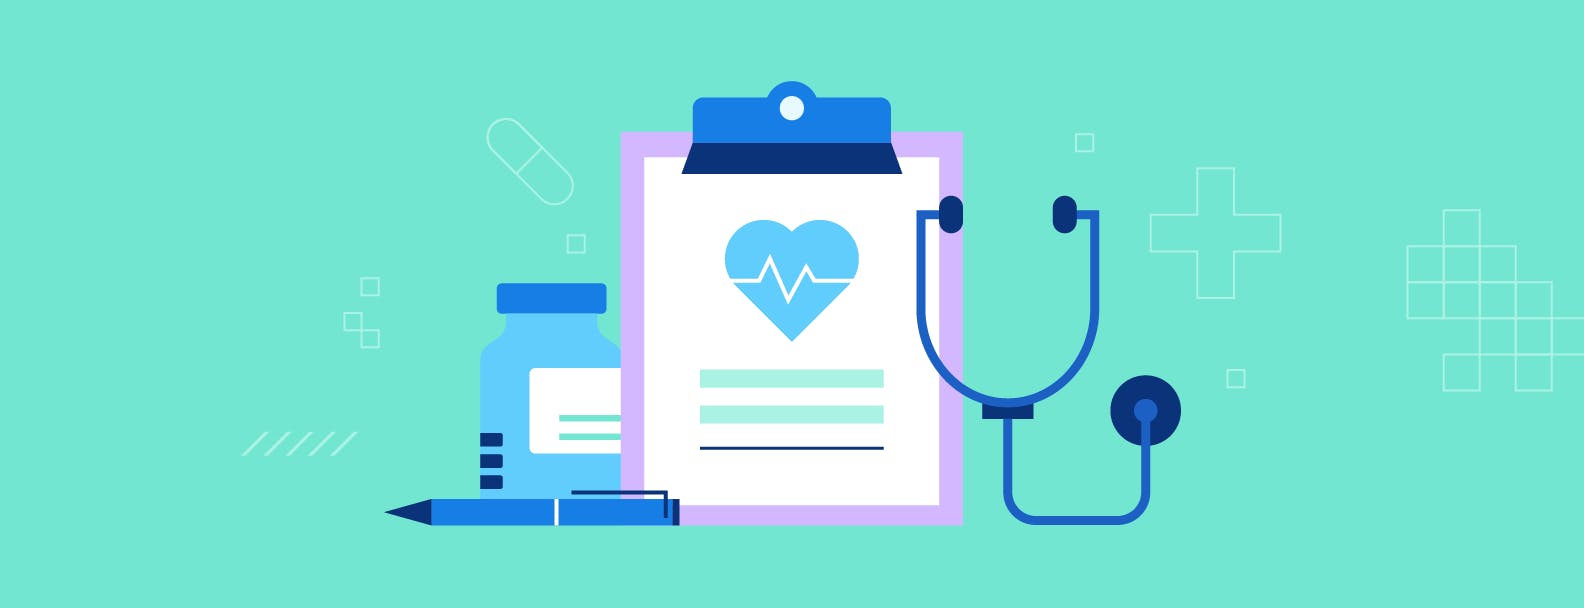 Icons of a doctor's chart, stethoscope, and pill bottle in front of a teal background depicting healthcare compliance. 